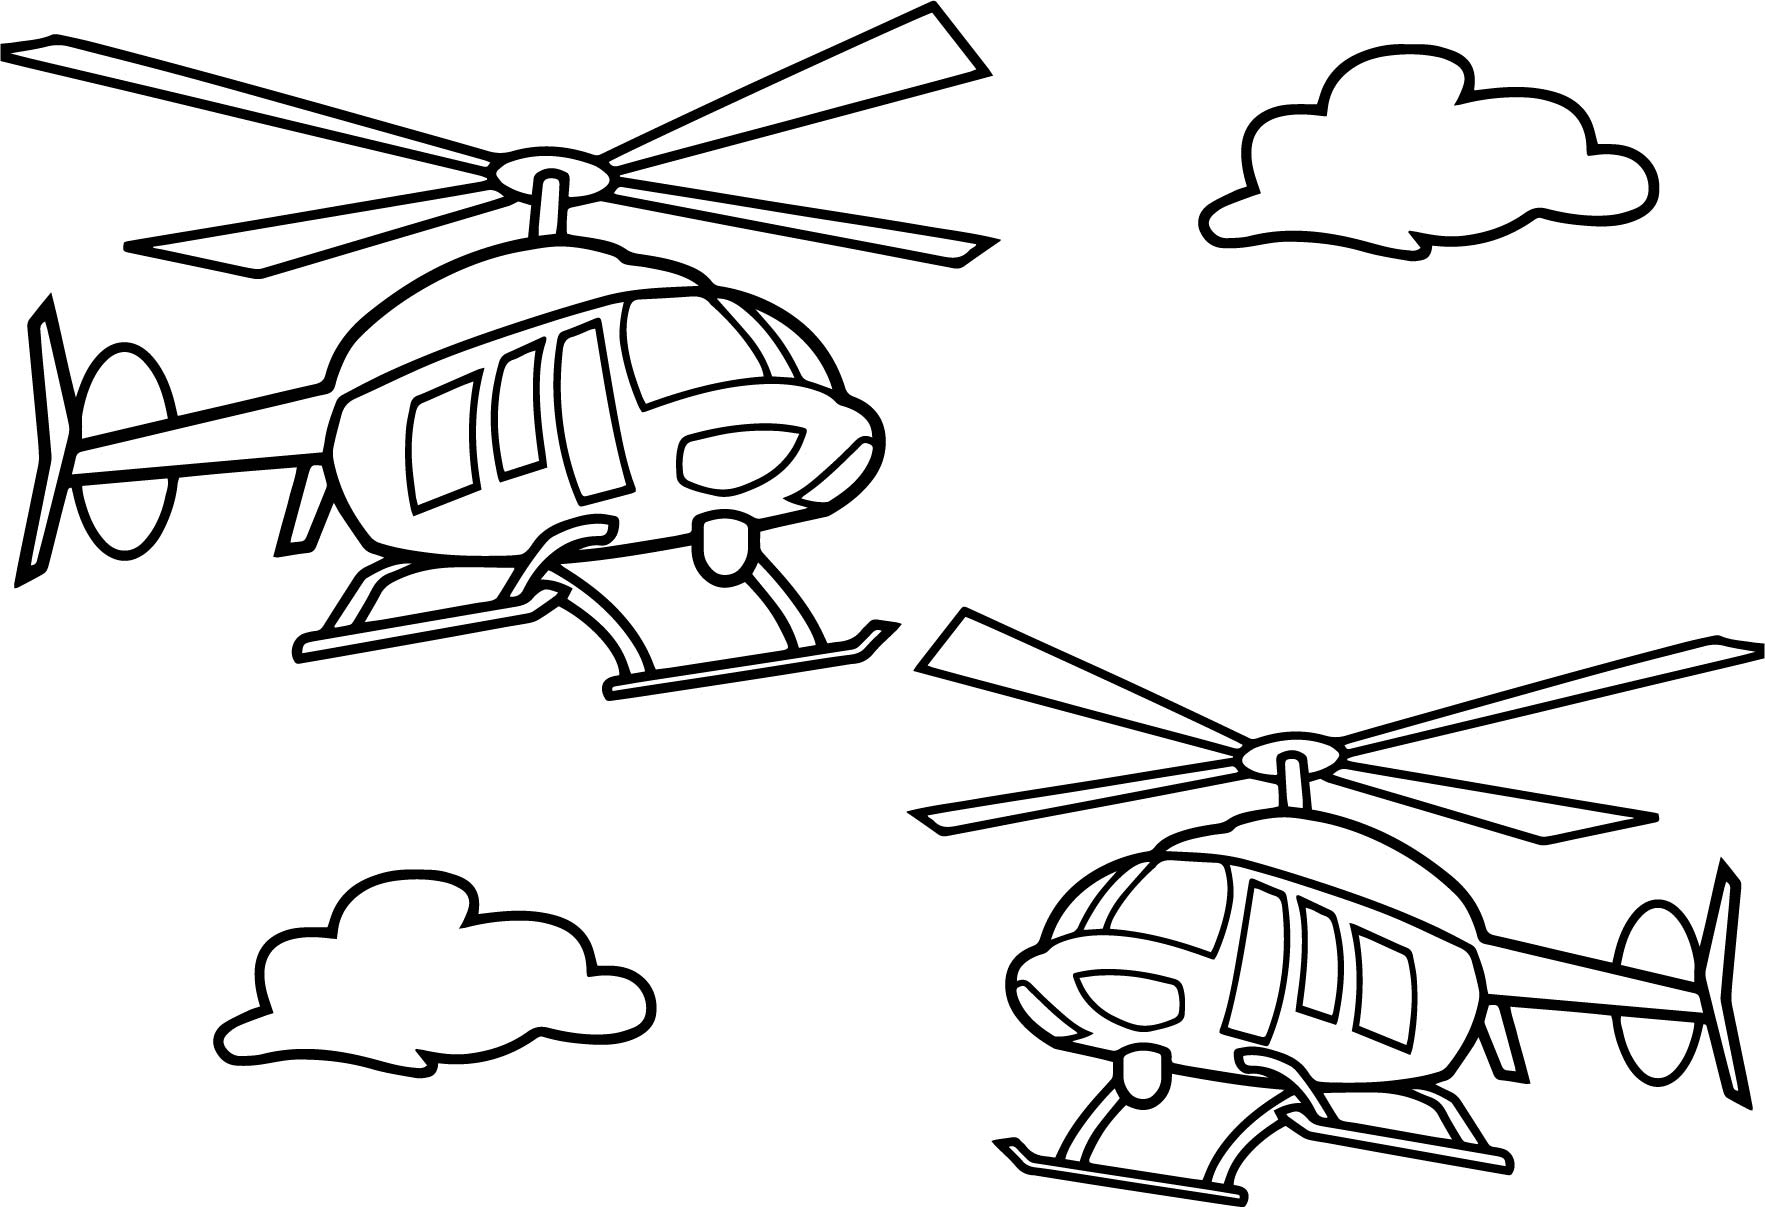 Helicopter Images For Coloring 10